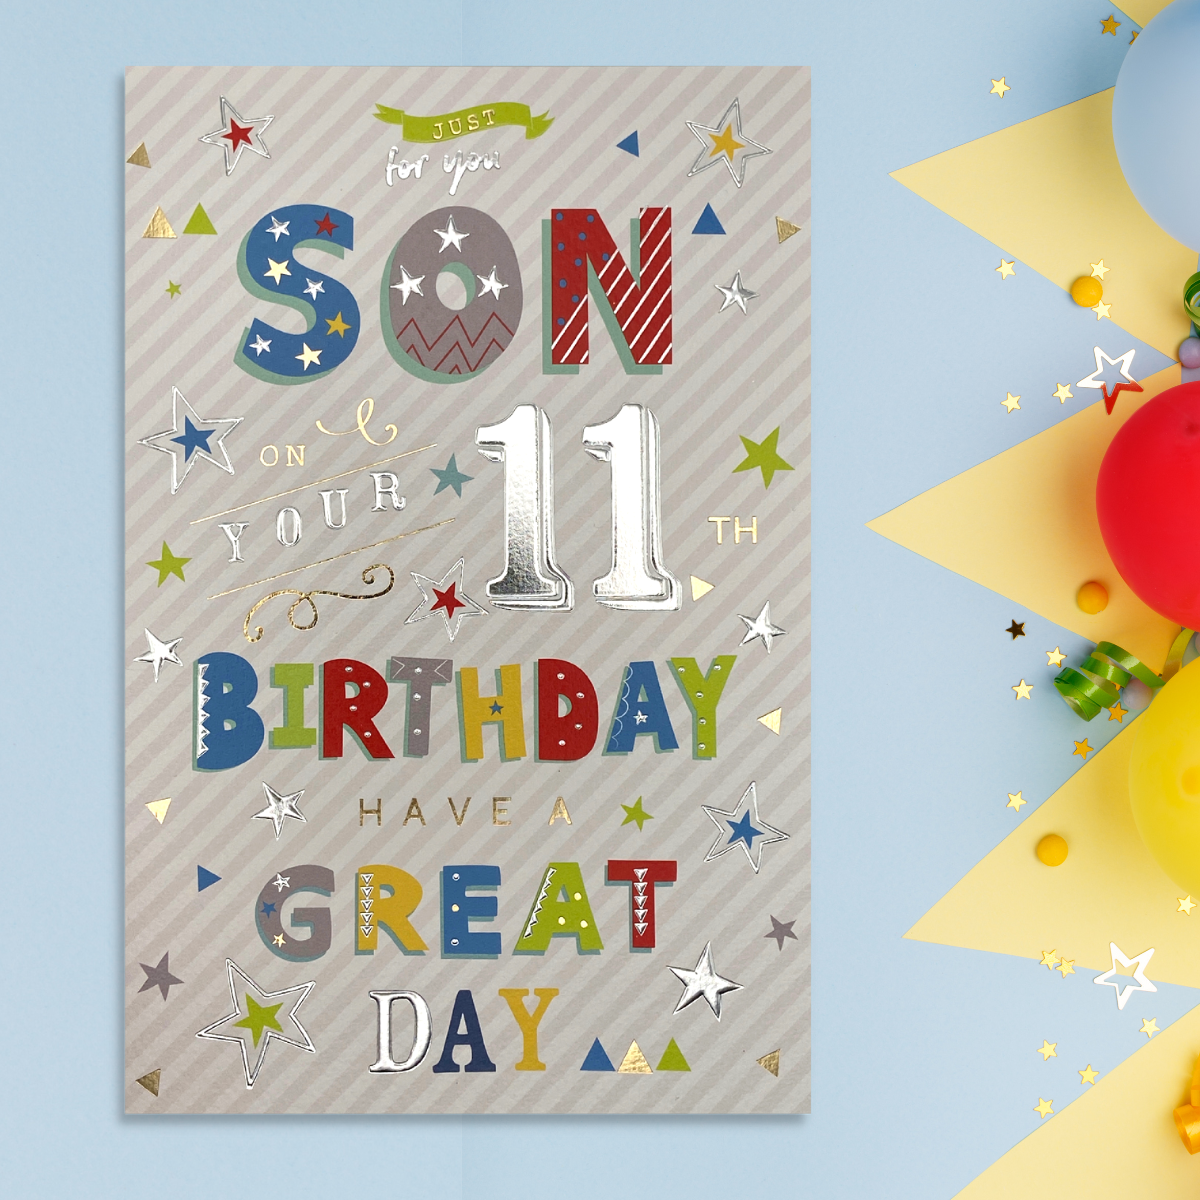 Front image showing brightly coloured text and silver foiled stars